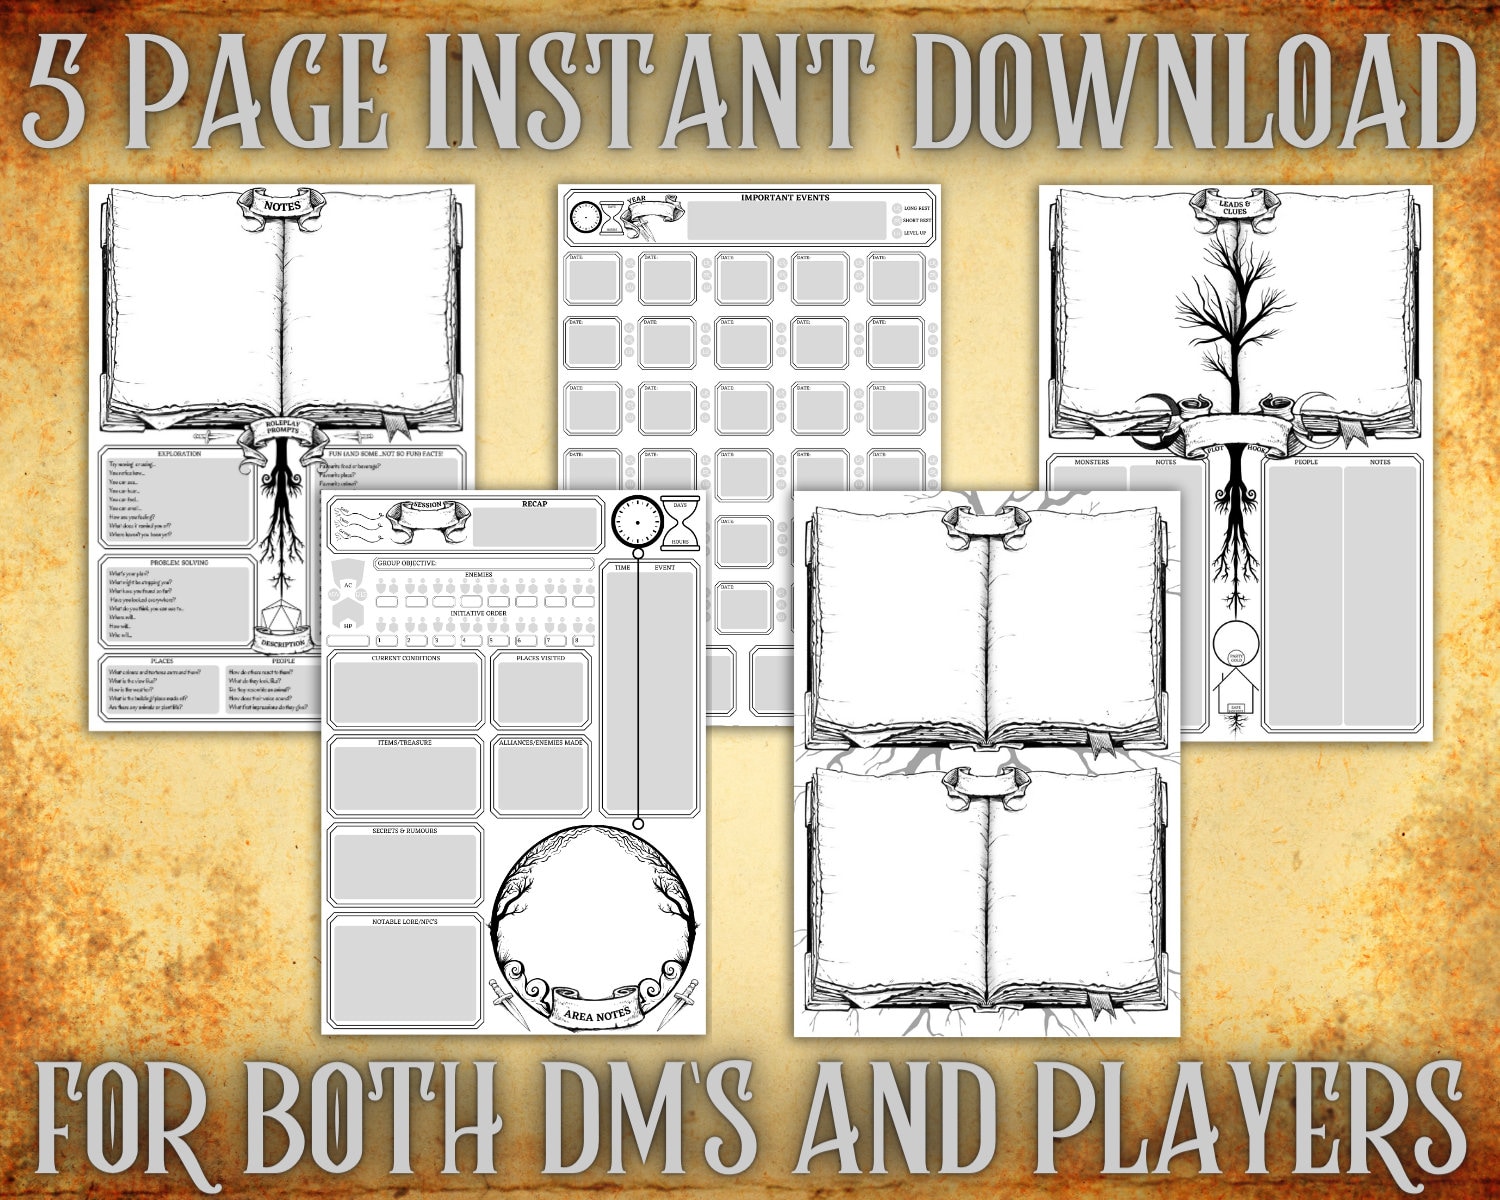 dnd-dungeons-dragons-campaign-planner-dnd-printable-dnd-etsy